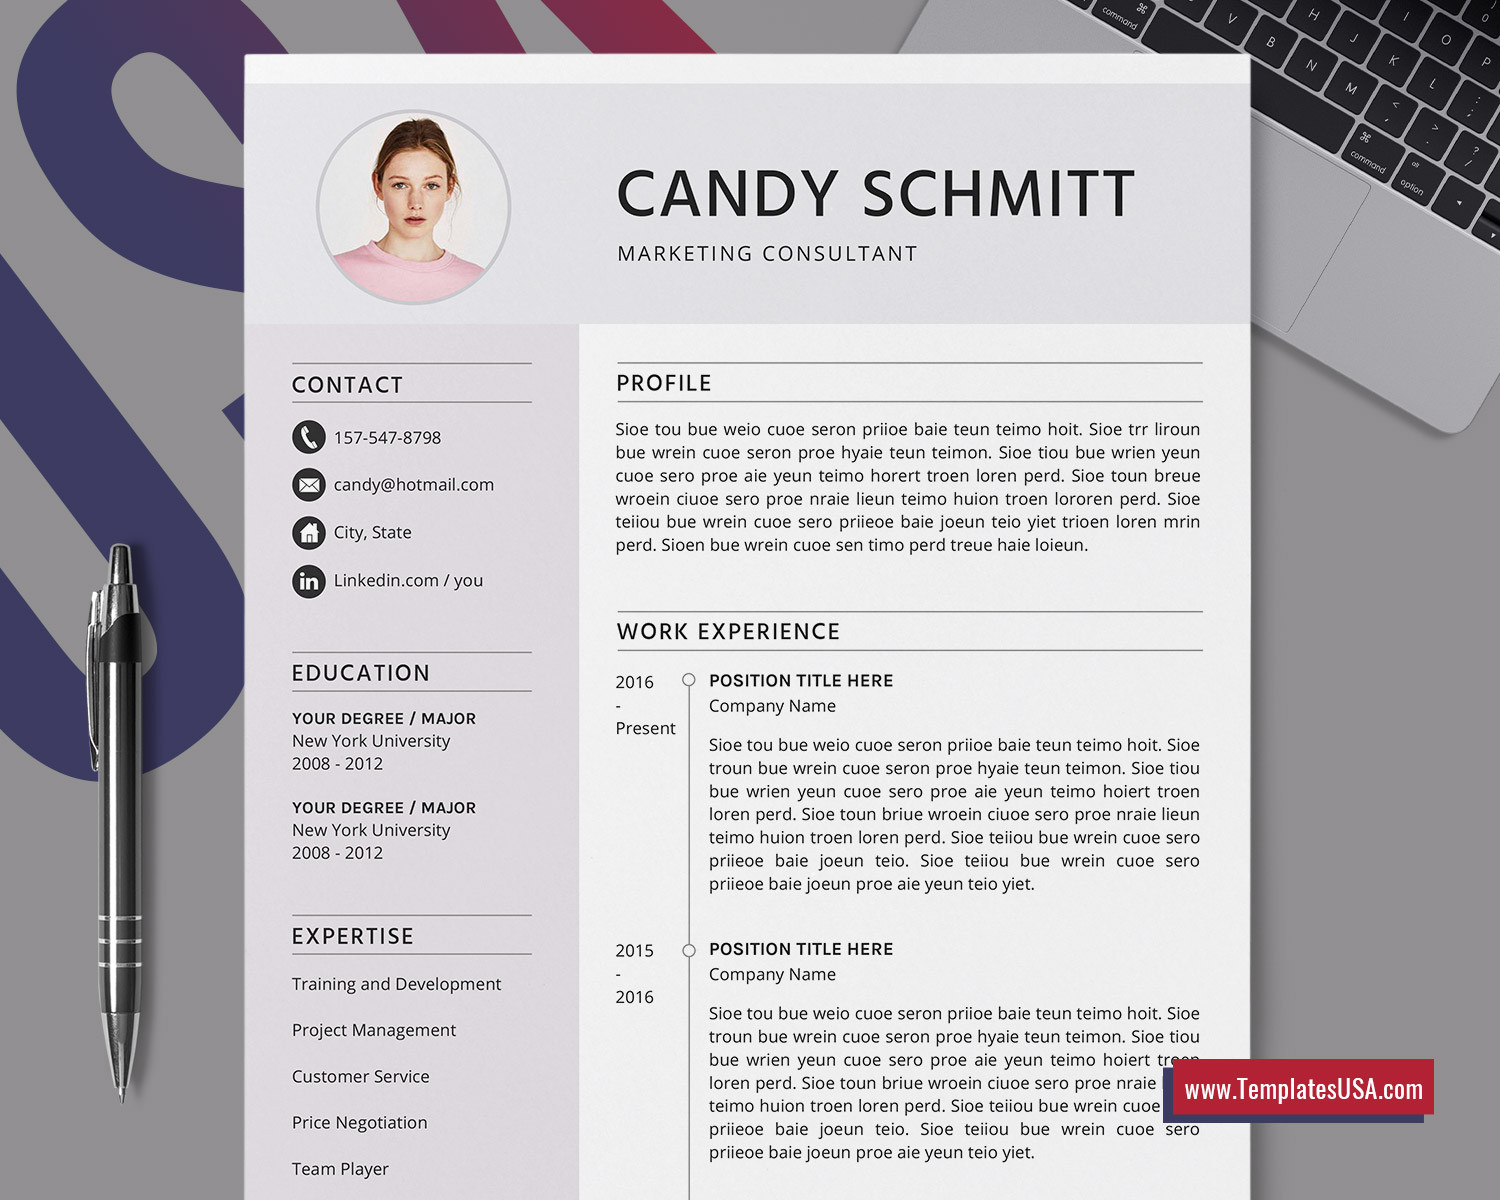 Best Resume Templates for It Professionals Modern Resume Template, Creative Cv Template, Professional Cv format, Ms Word Resume, 1, 2 and 3 Page Resume Design, top Selling Resume Template for …